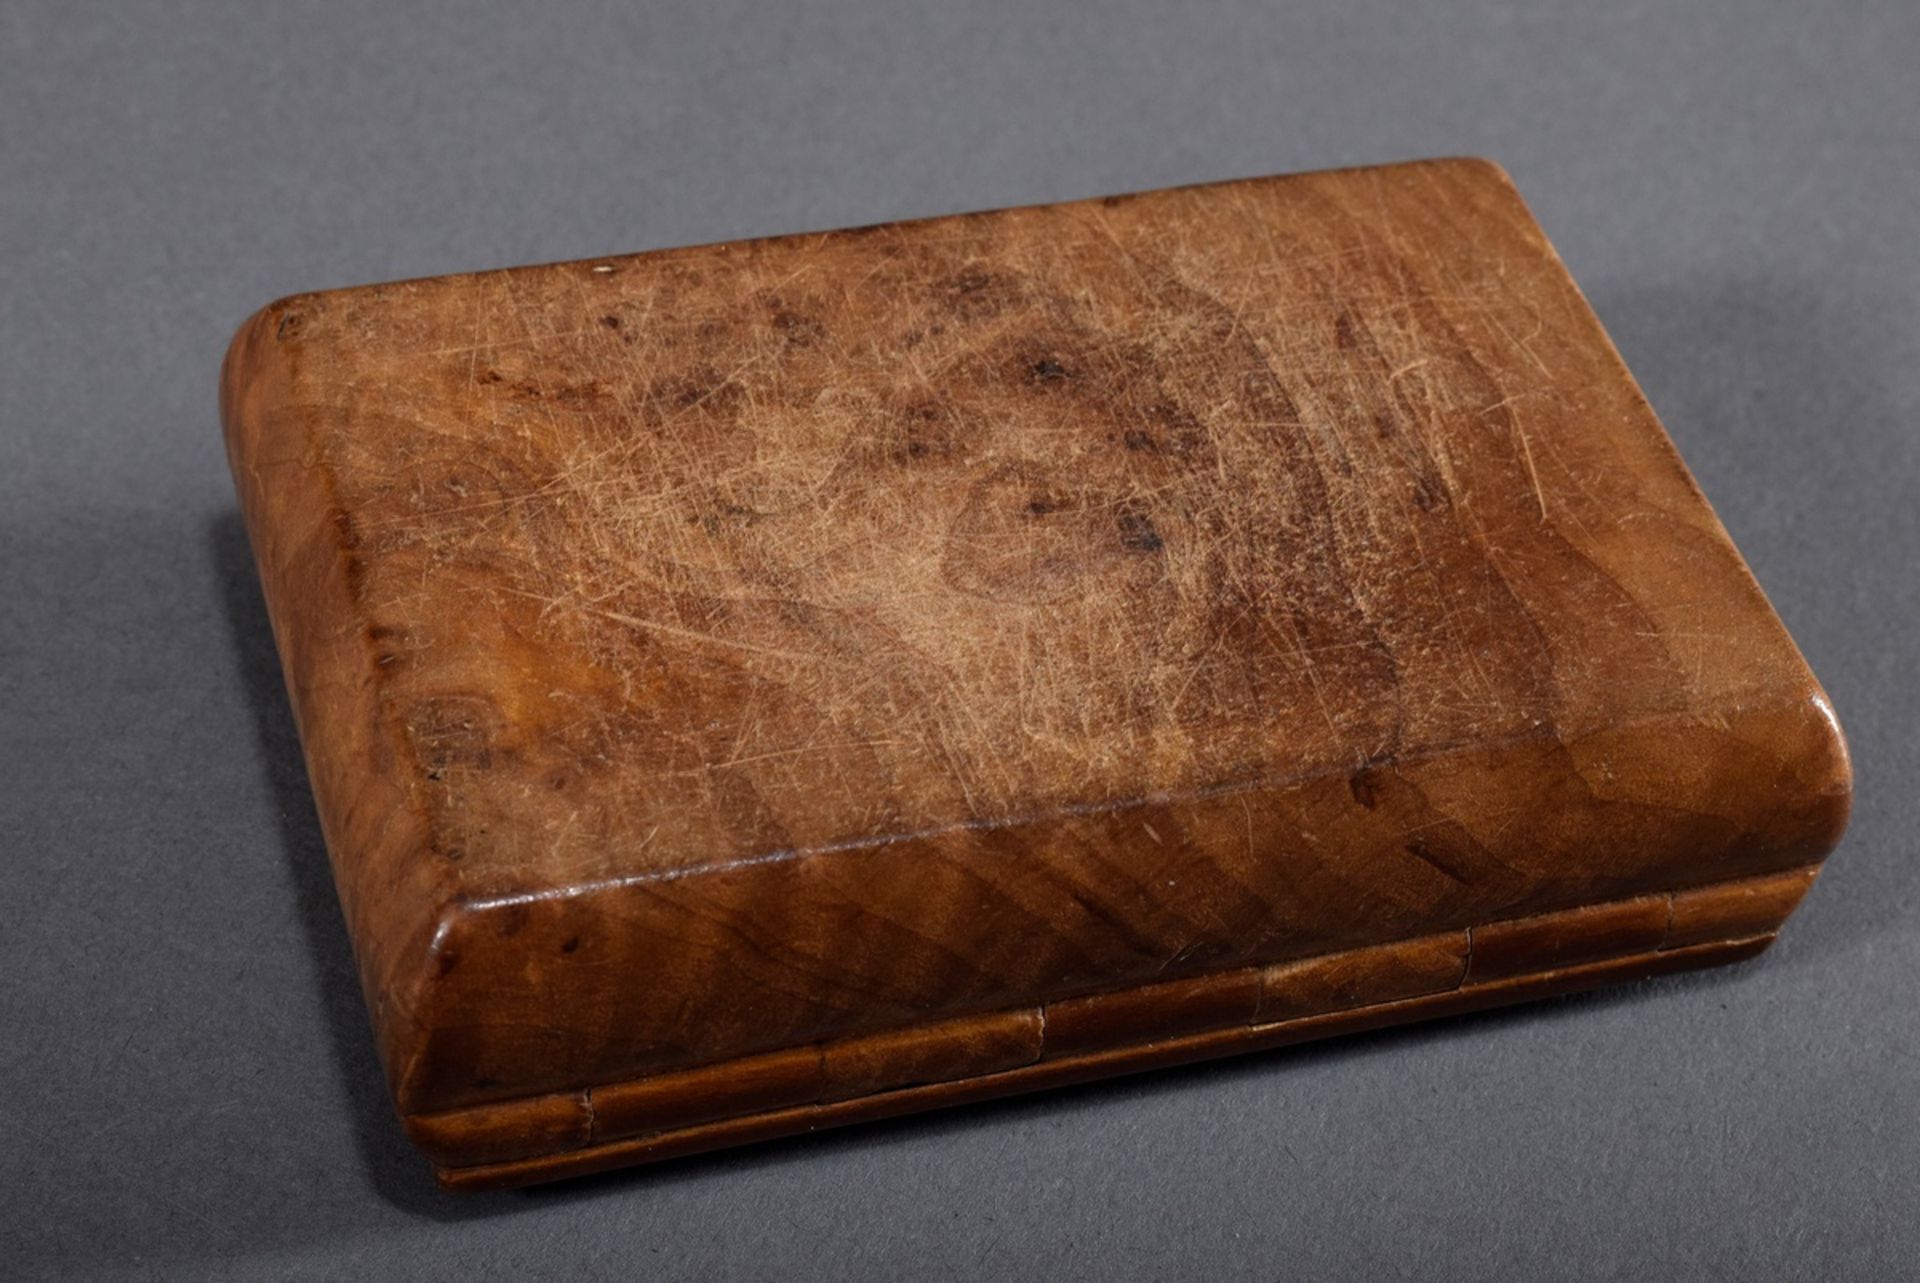 Wurzelholz Schnupftabakdose mit geschnitztem Rel | Burl wood snuff box with carved relief in the li - Image 4 of 8